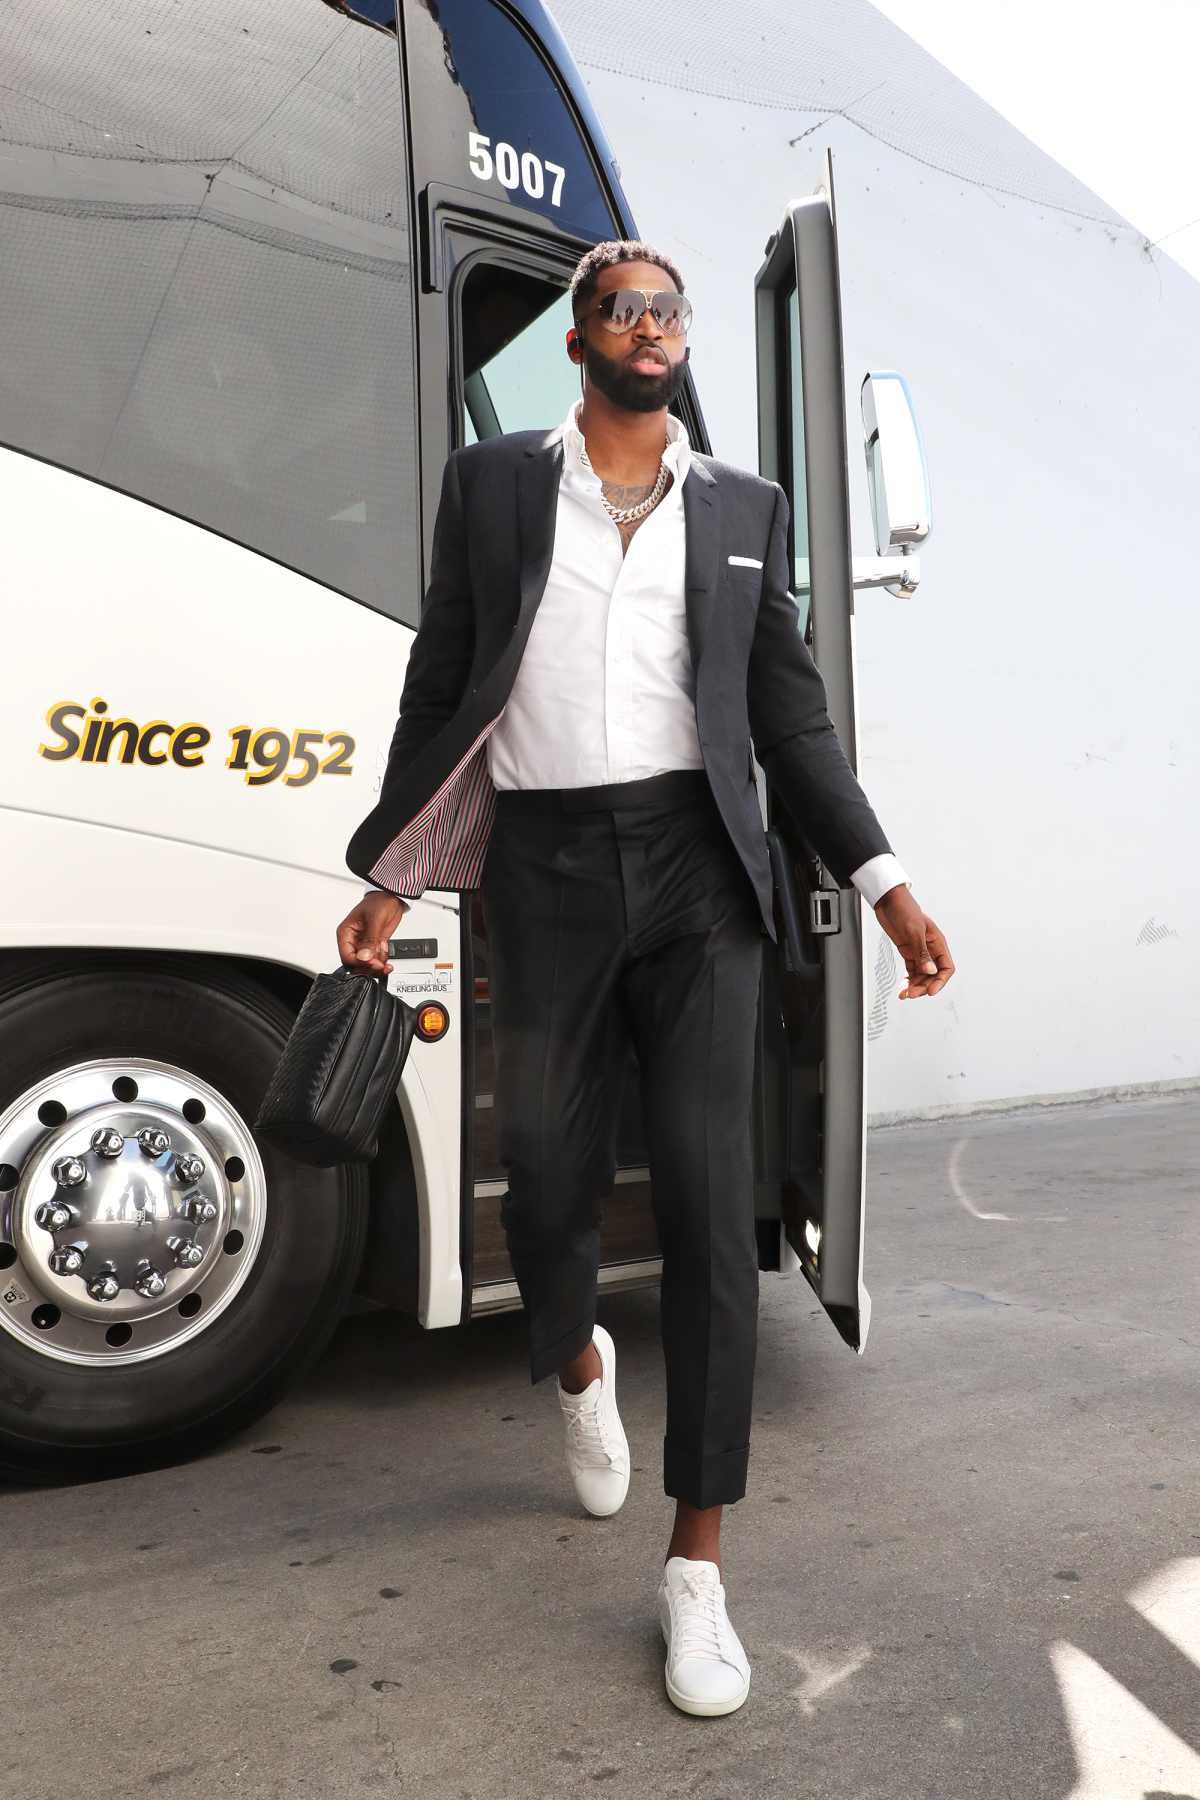 LeBron James and Cleveland Cavaliers in Thom Browne at the NBA Finals